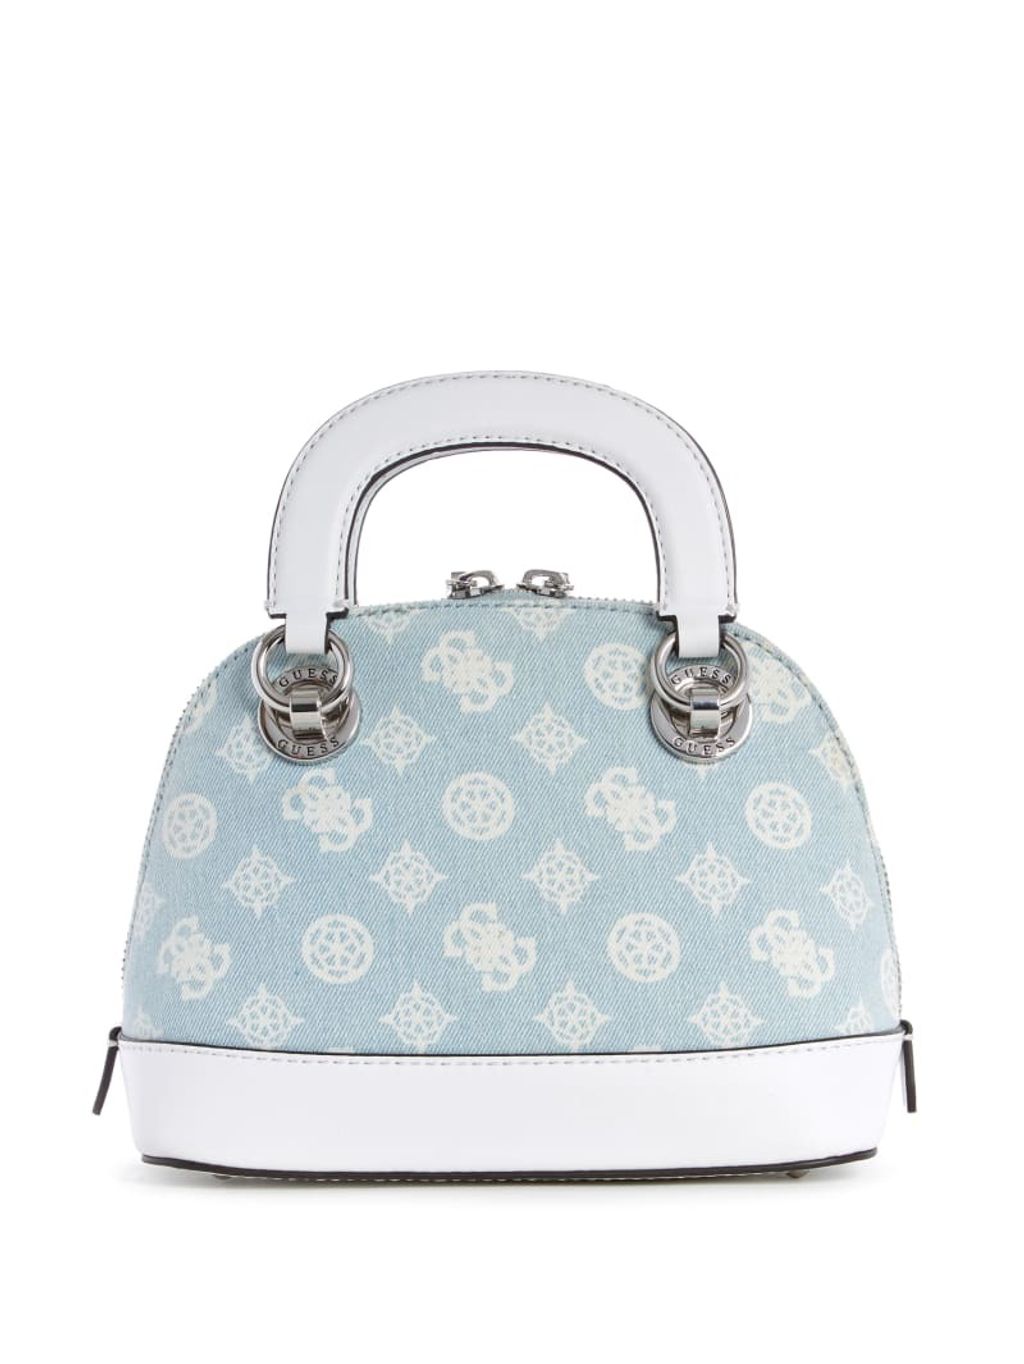 GUESS WOMEN'S CESSILY SMALL DOME SATCHEL – DYRA NADIRA INDUSTRIES